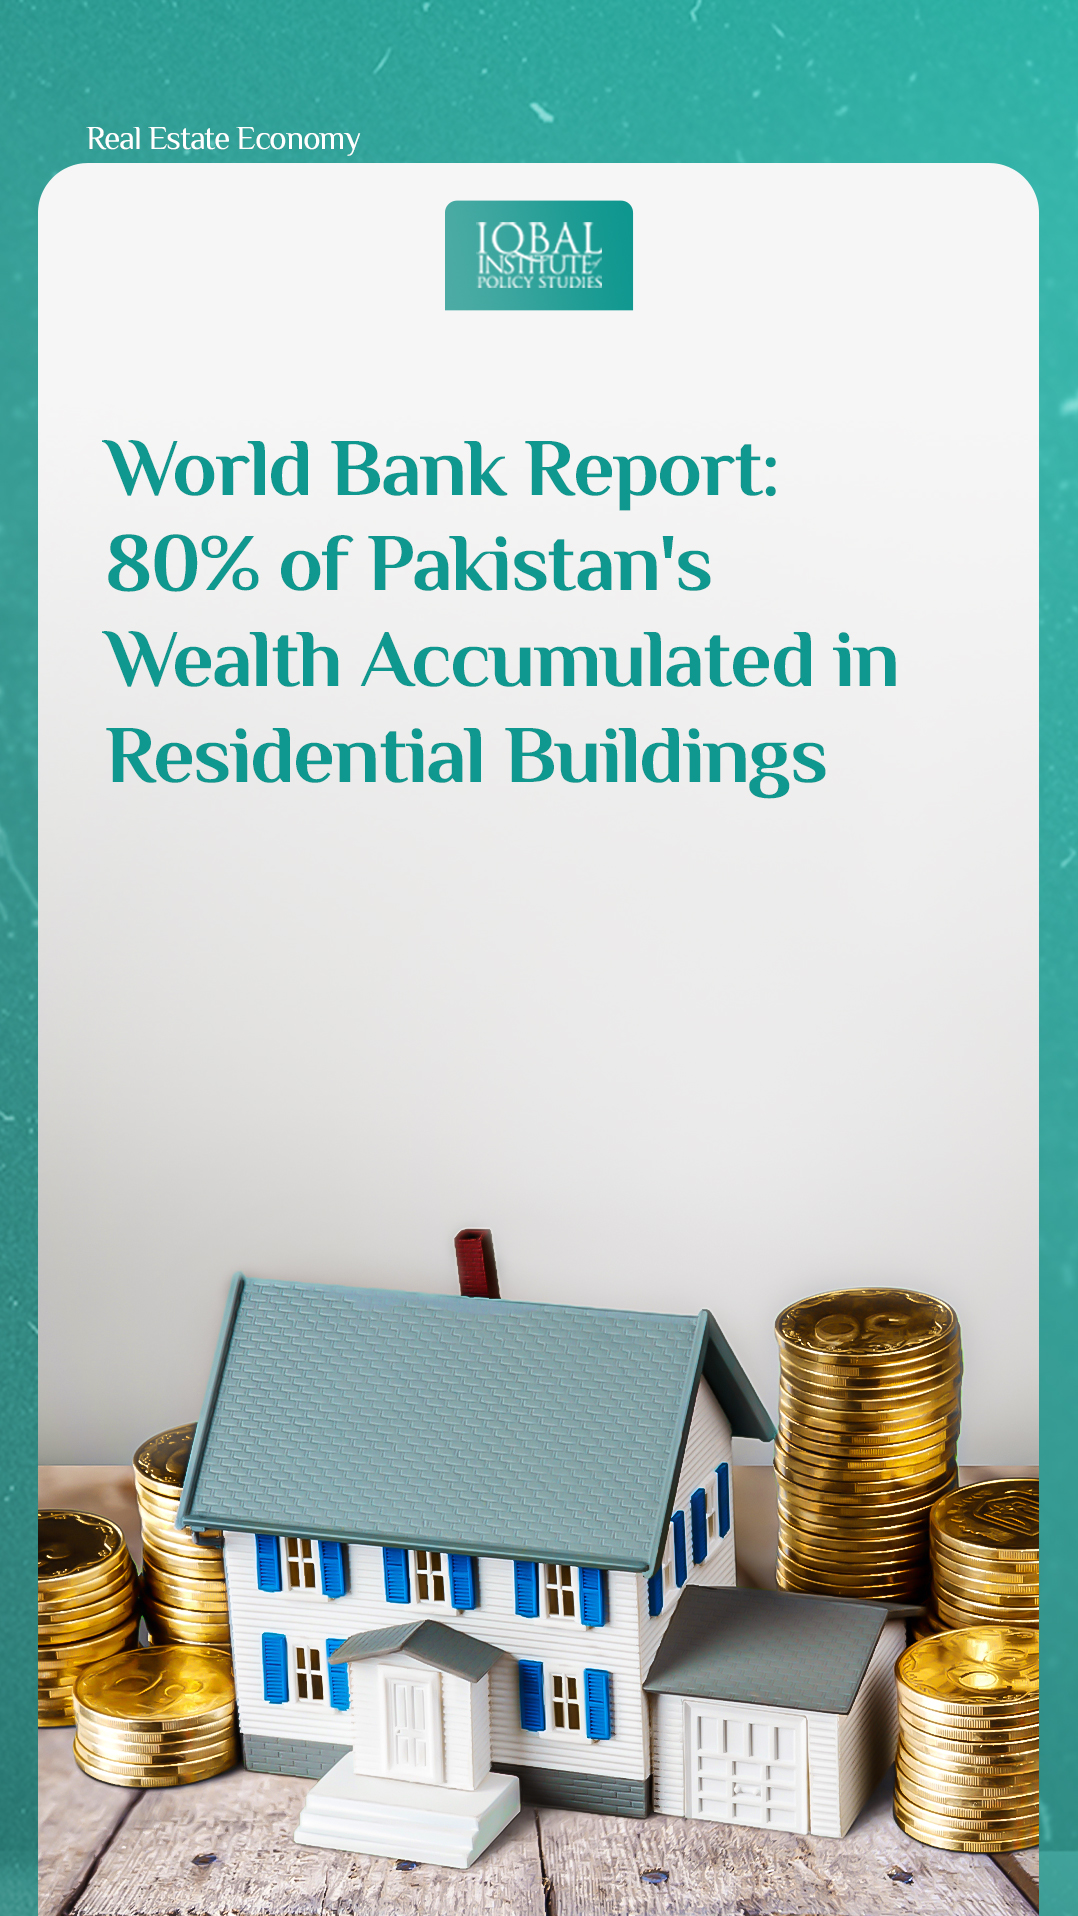 World Bank Report: 80% of Pakistan's Wealth Accumulated in Residential Buildings